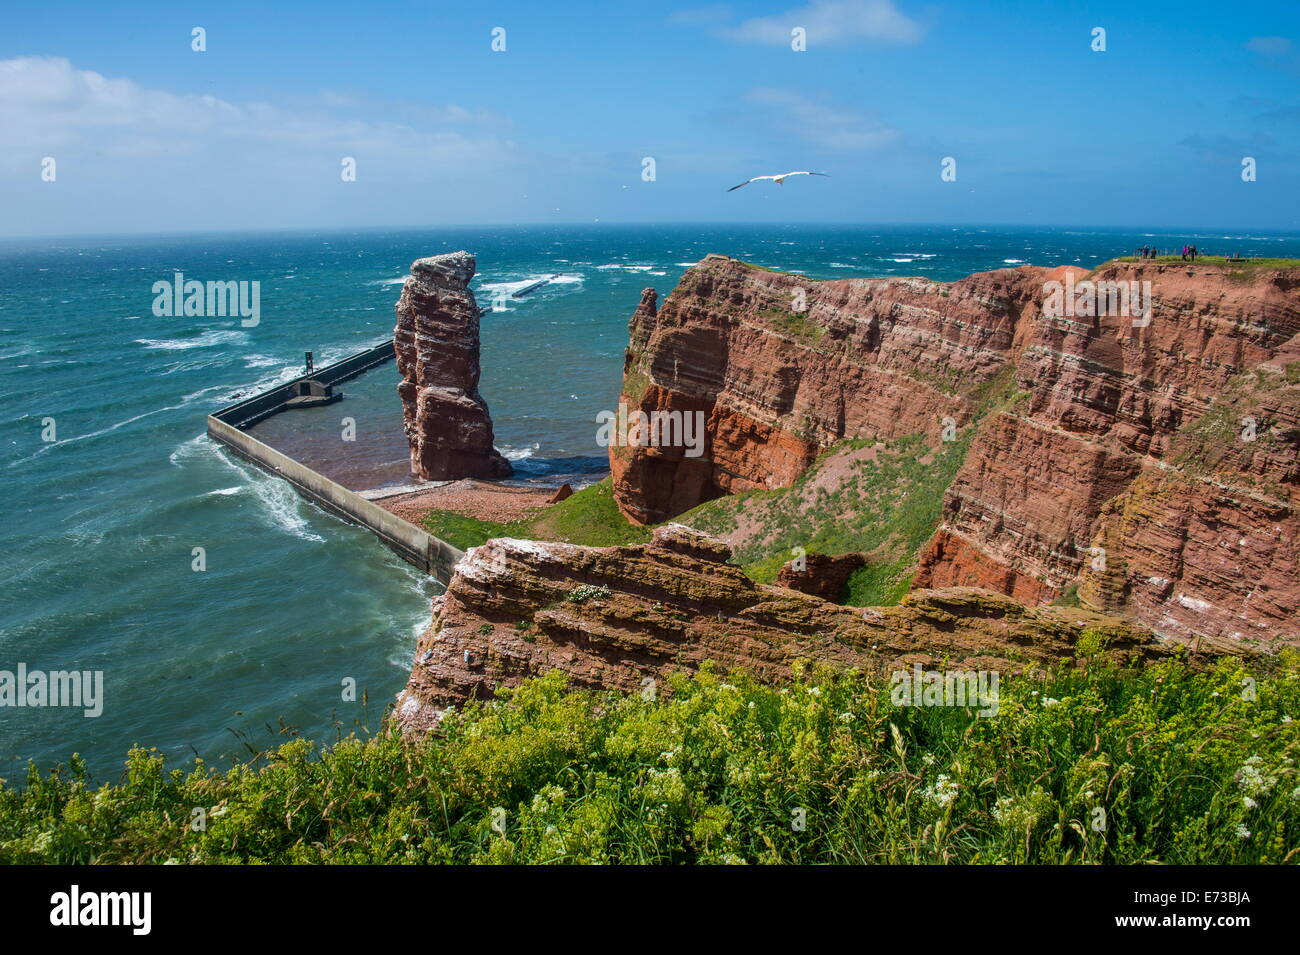 Lange Anna (Long Anna) free standing rock column in Heligoland, small German archipelago in the North Sea, Germany, Europe Stock Photo